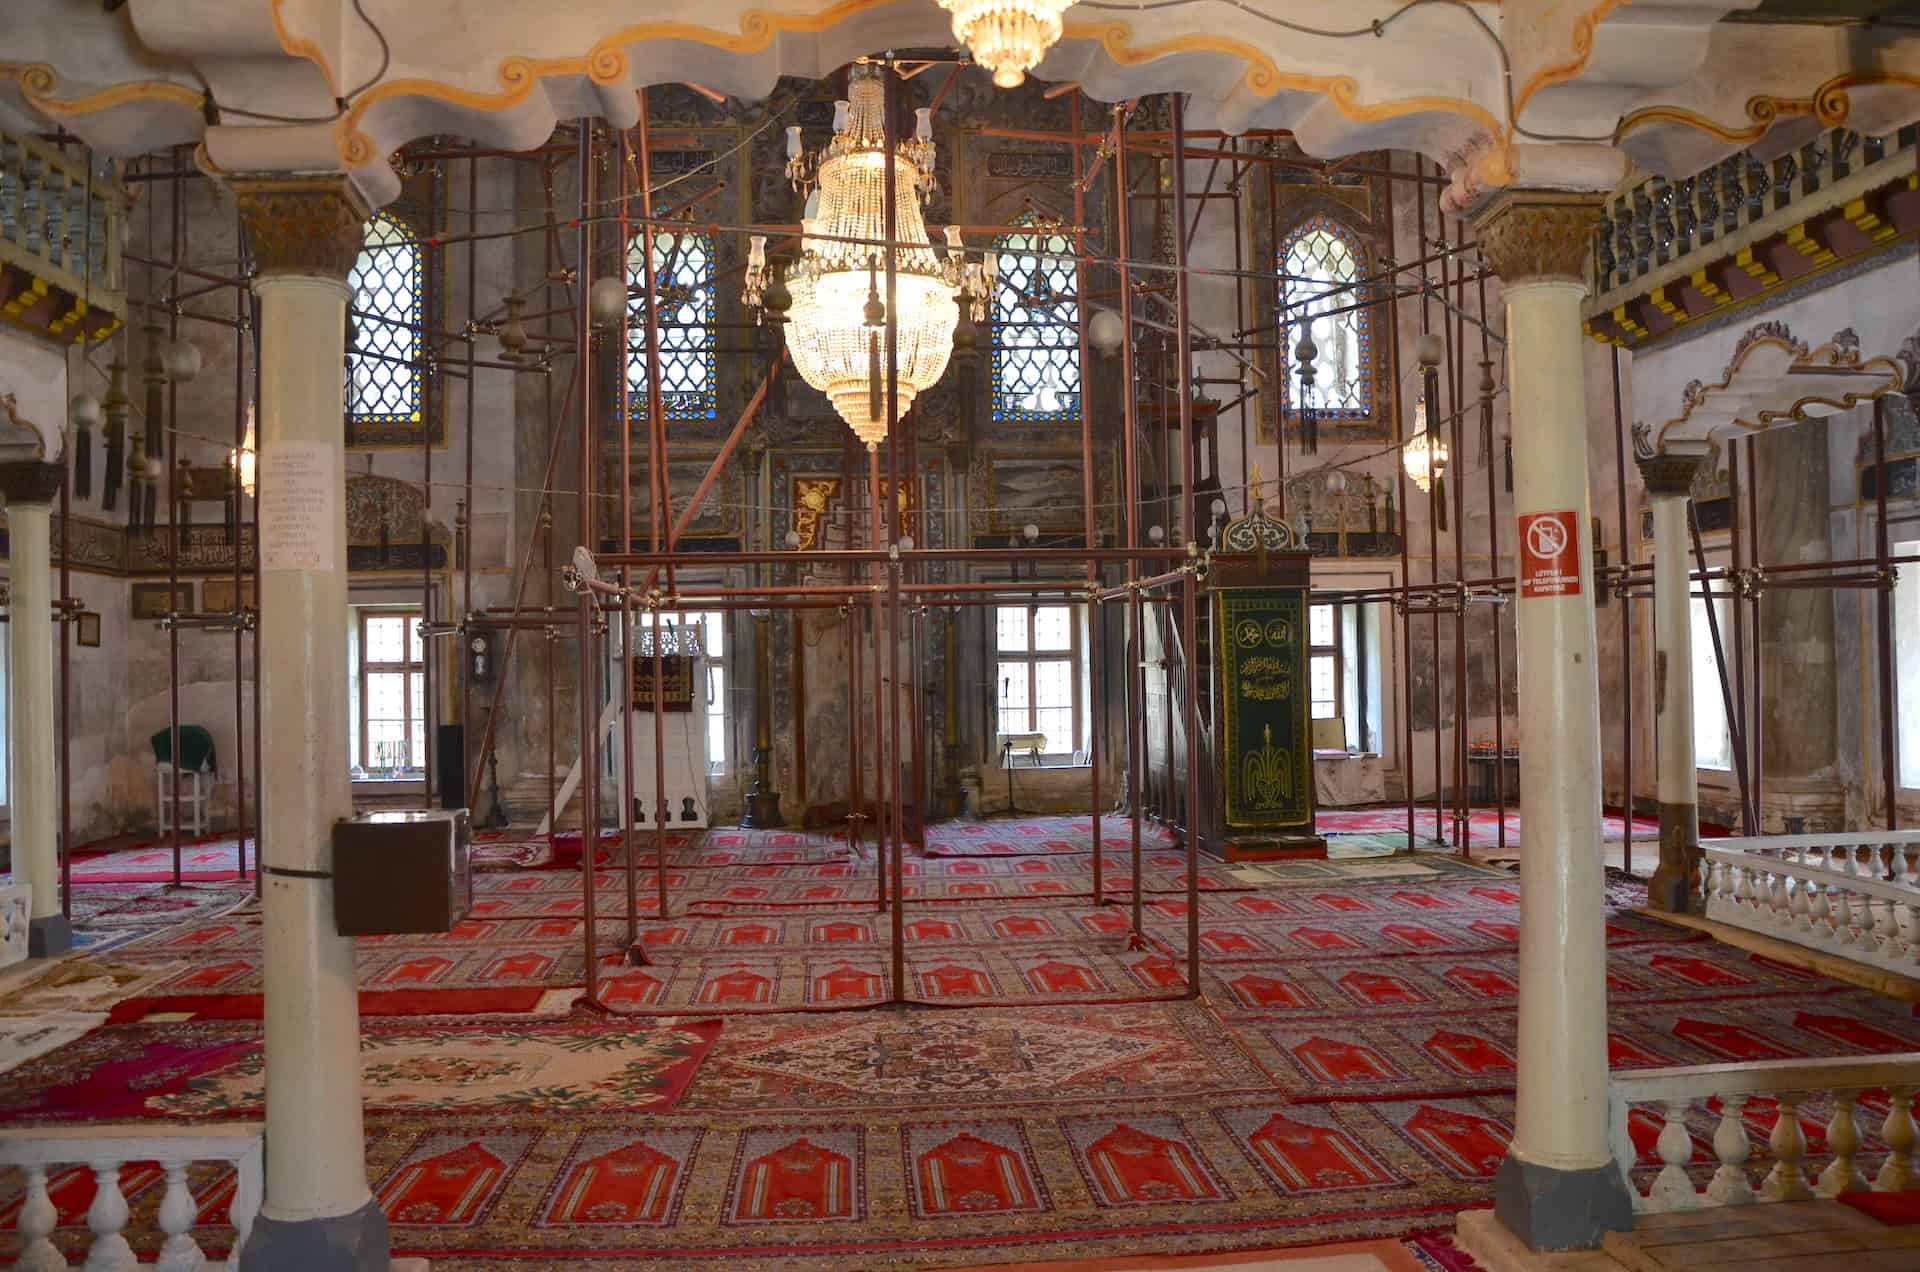 Prayer hall of the Tombul Mosque in Shumen, Bulgaria